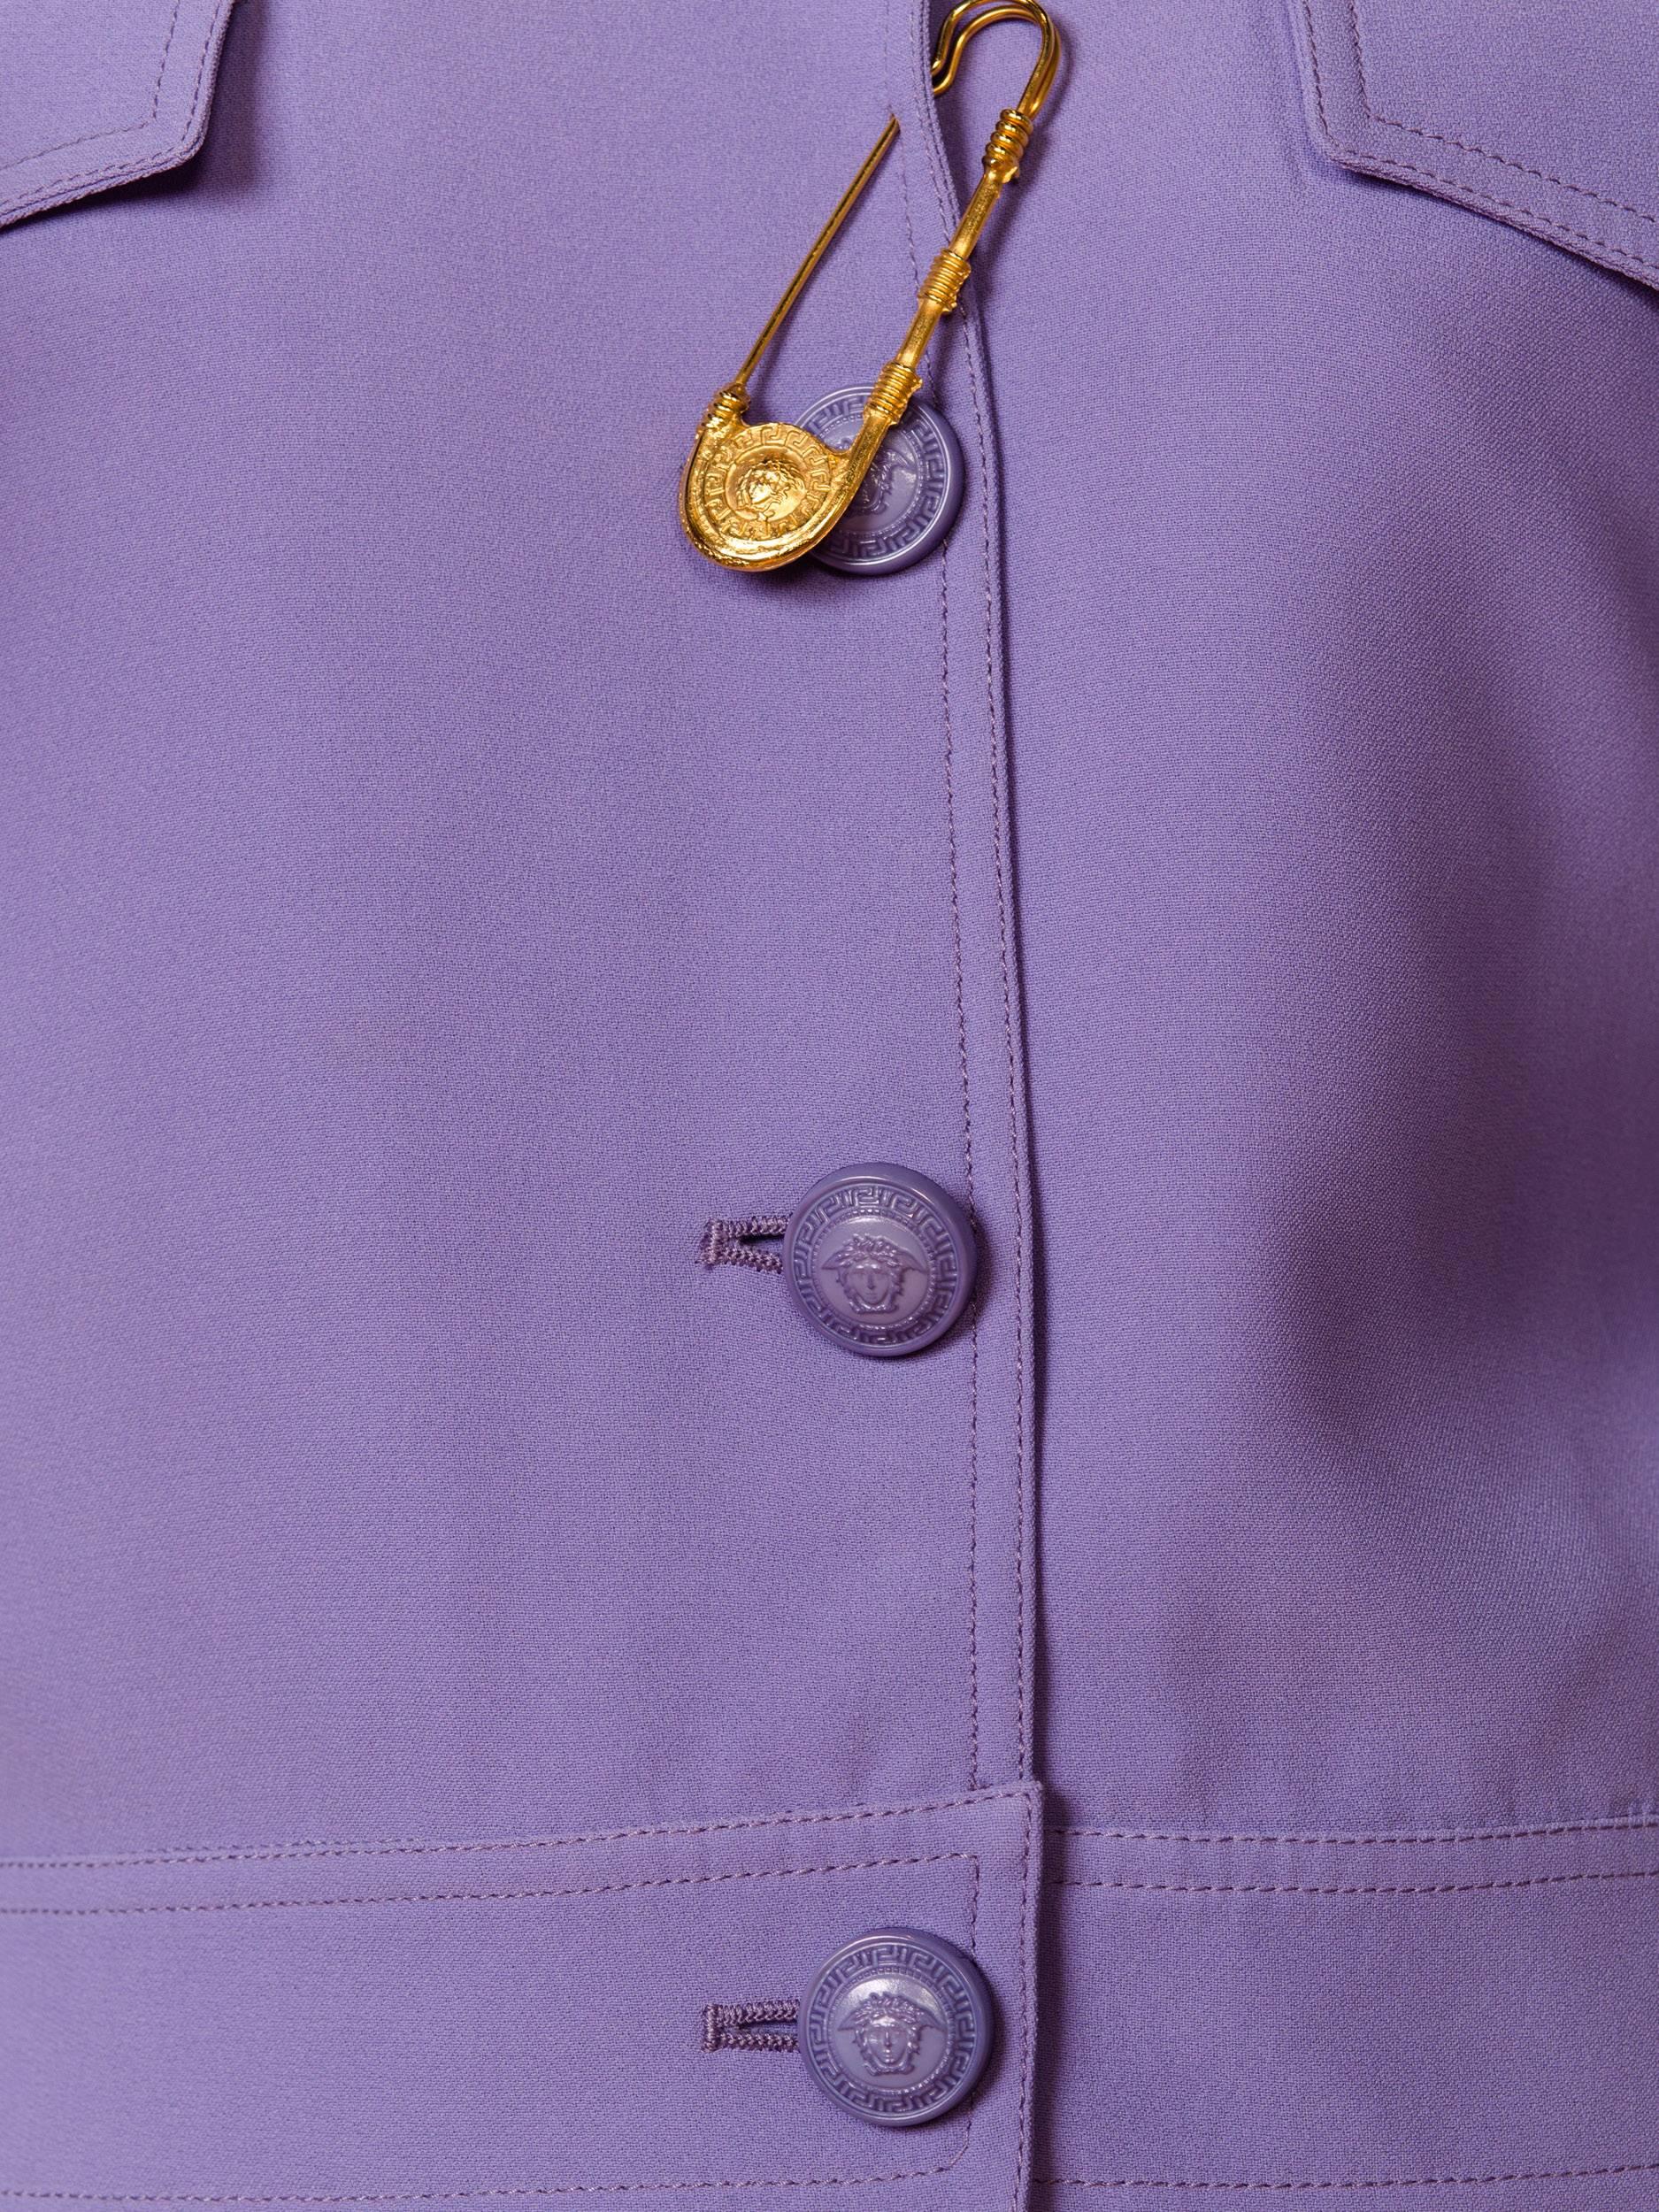 1990S GIANNI VERSACE Lilac Rayon Blend Crepe Safety Pin Suit Skirt 5